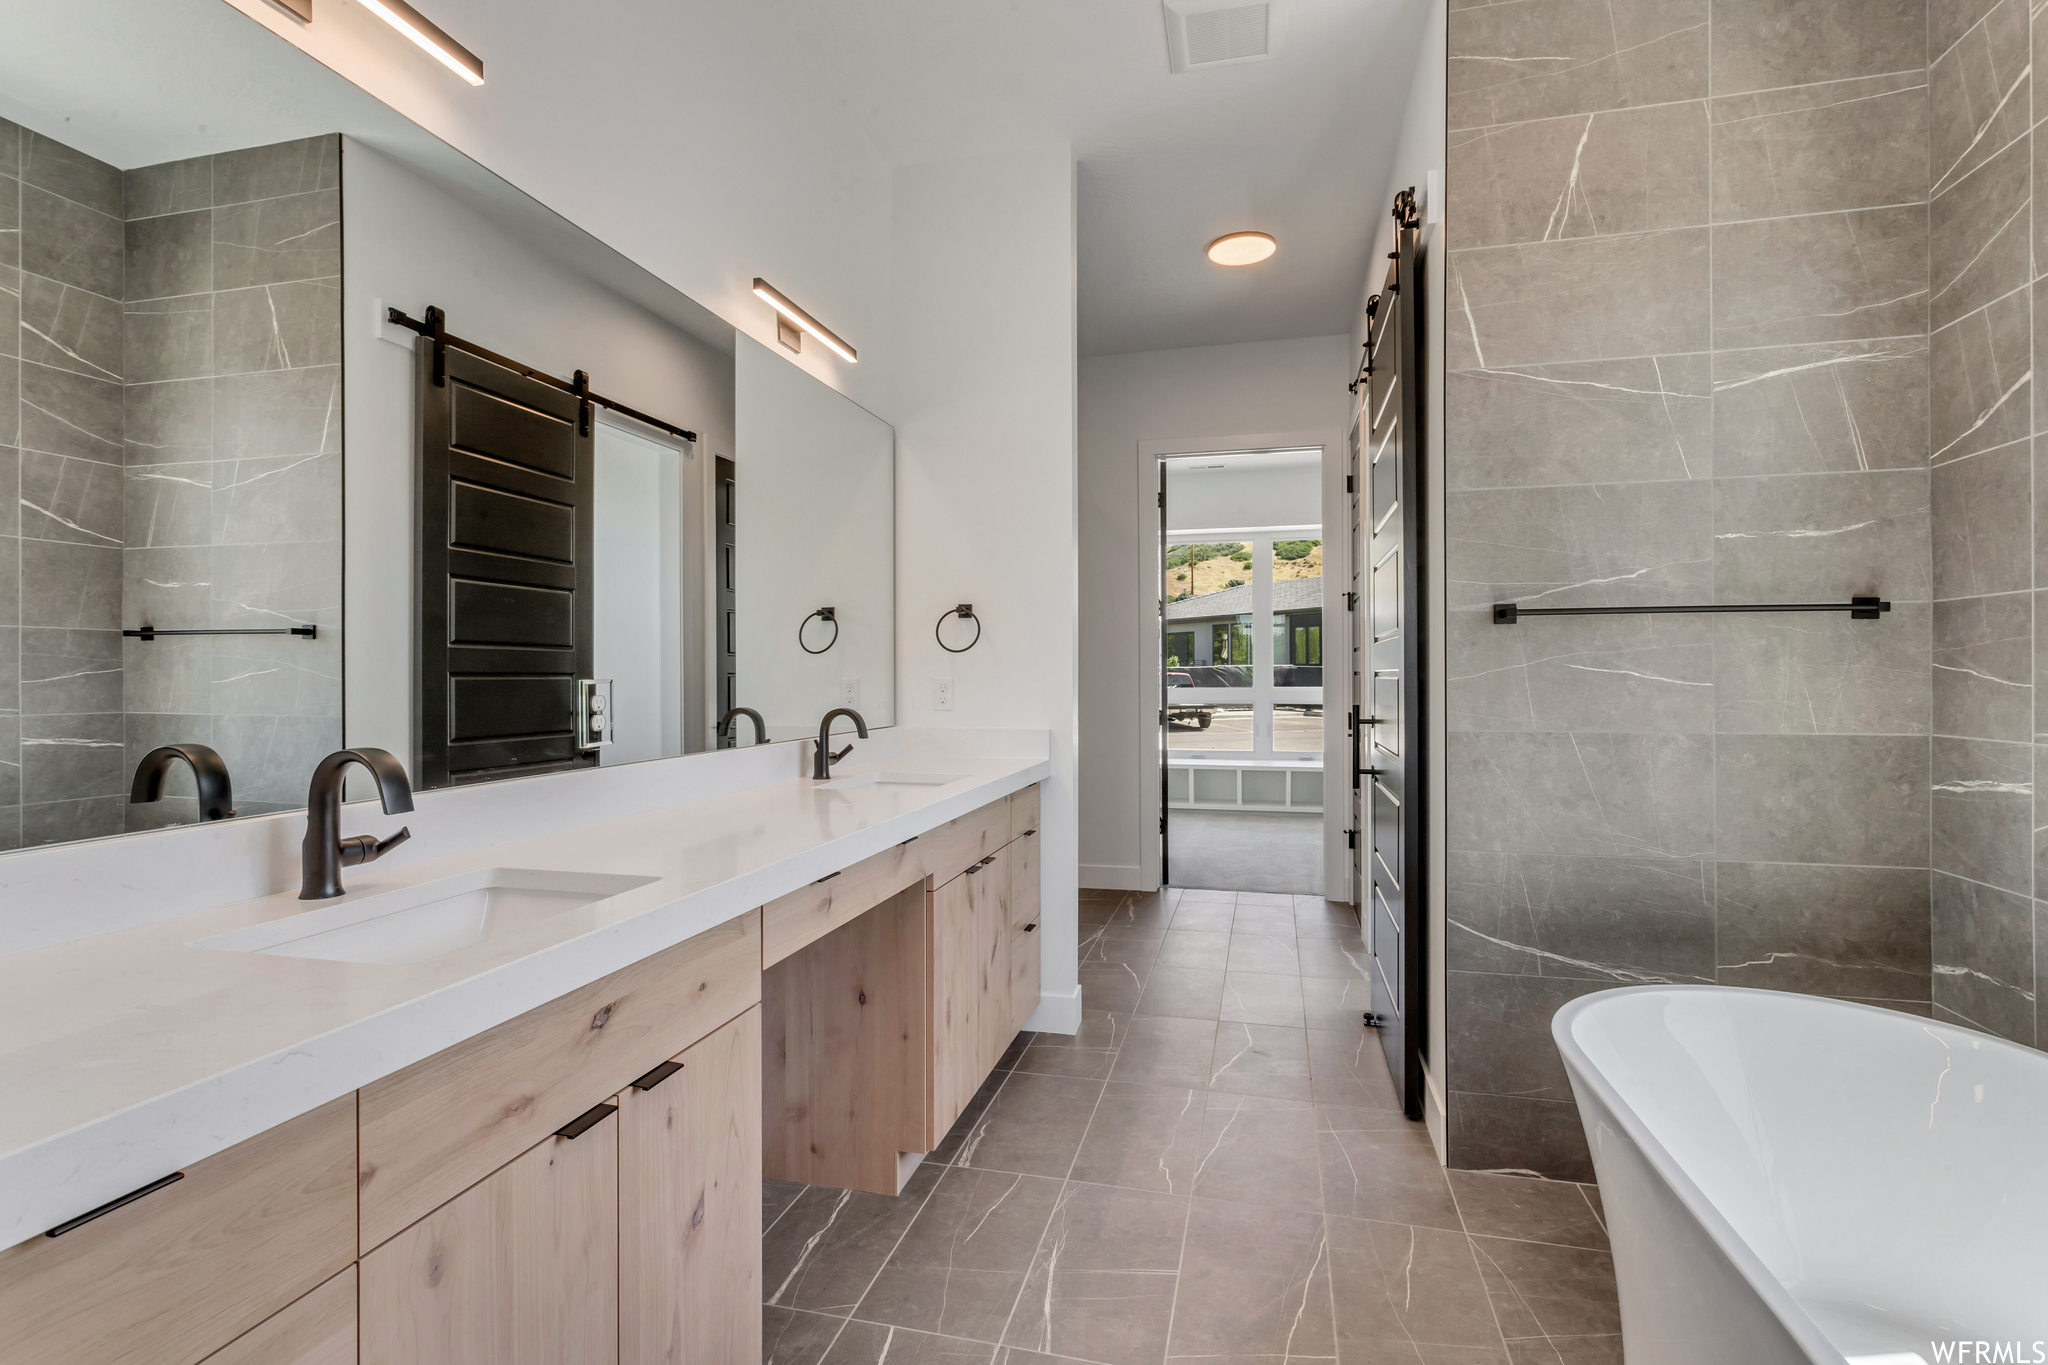 Dual sinks, soaking tub and floor to ceiling tile elevate this bath to luxury level